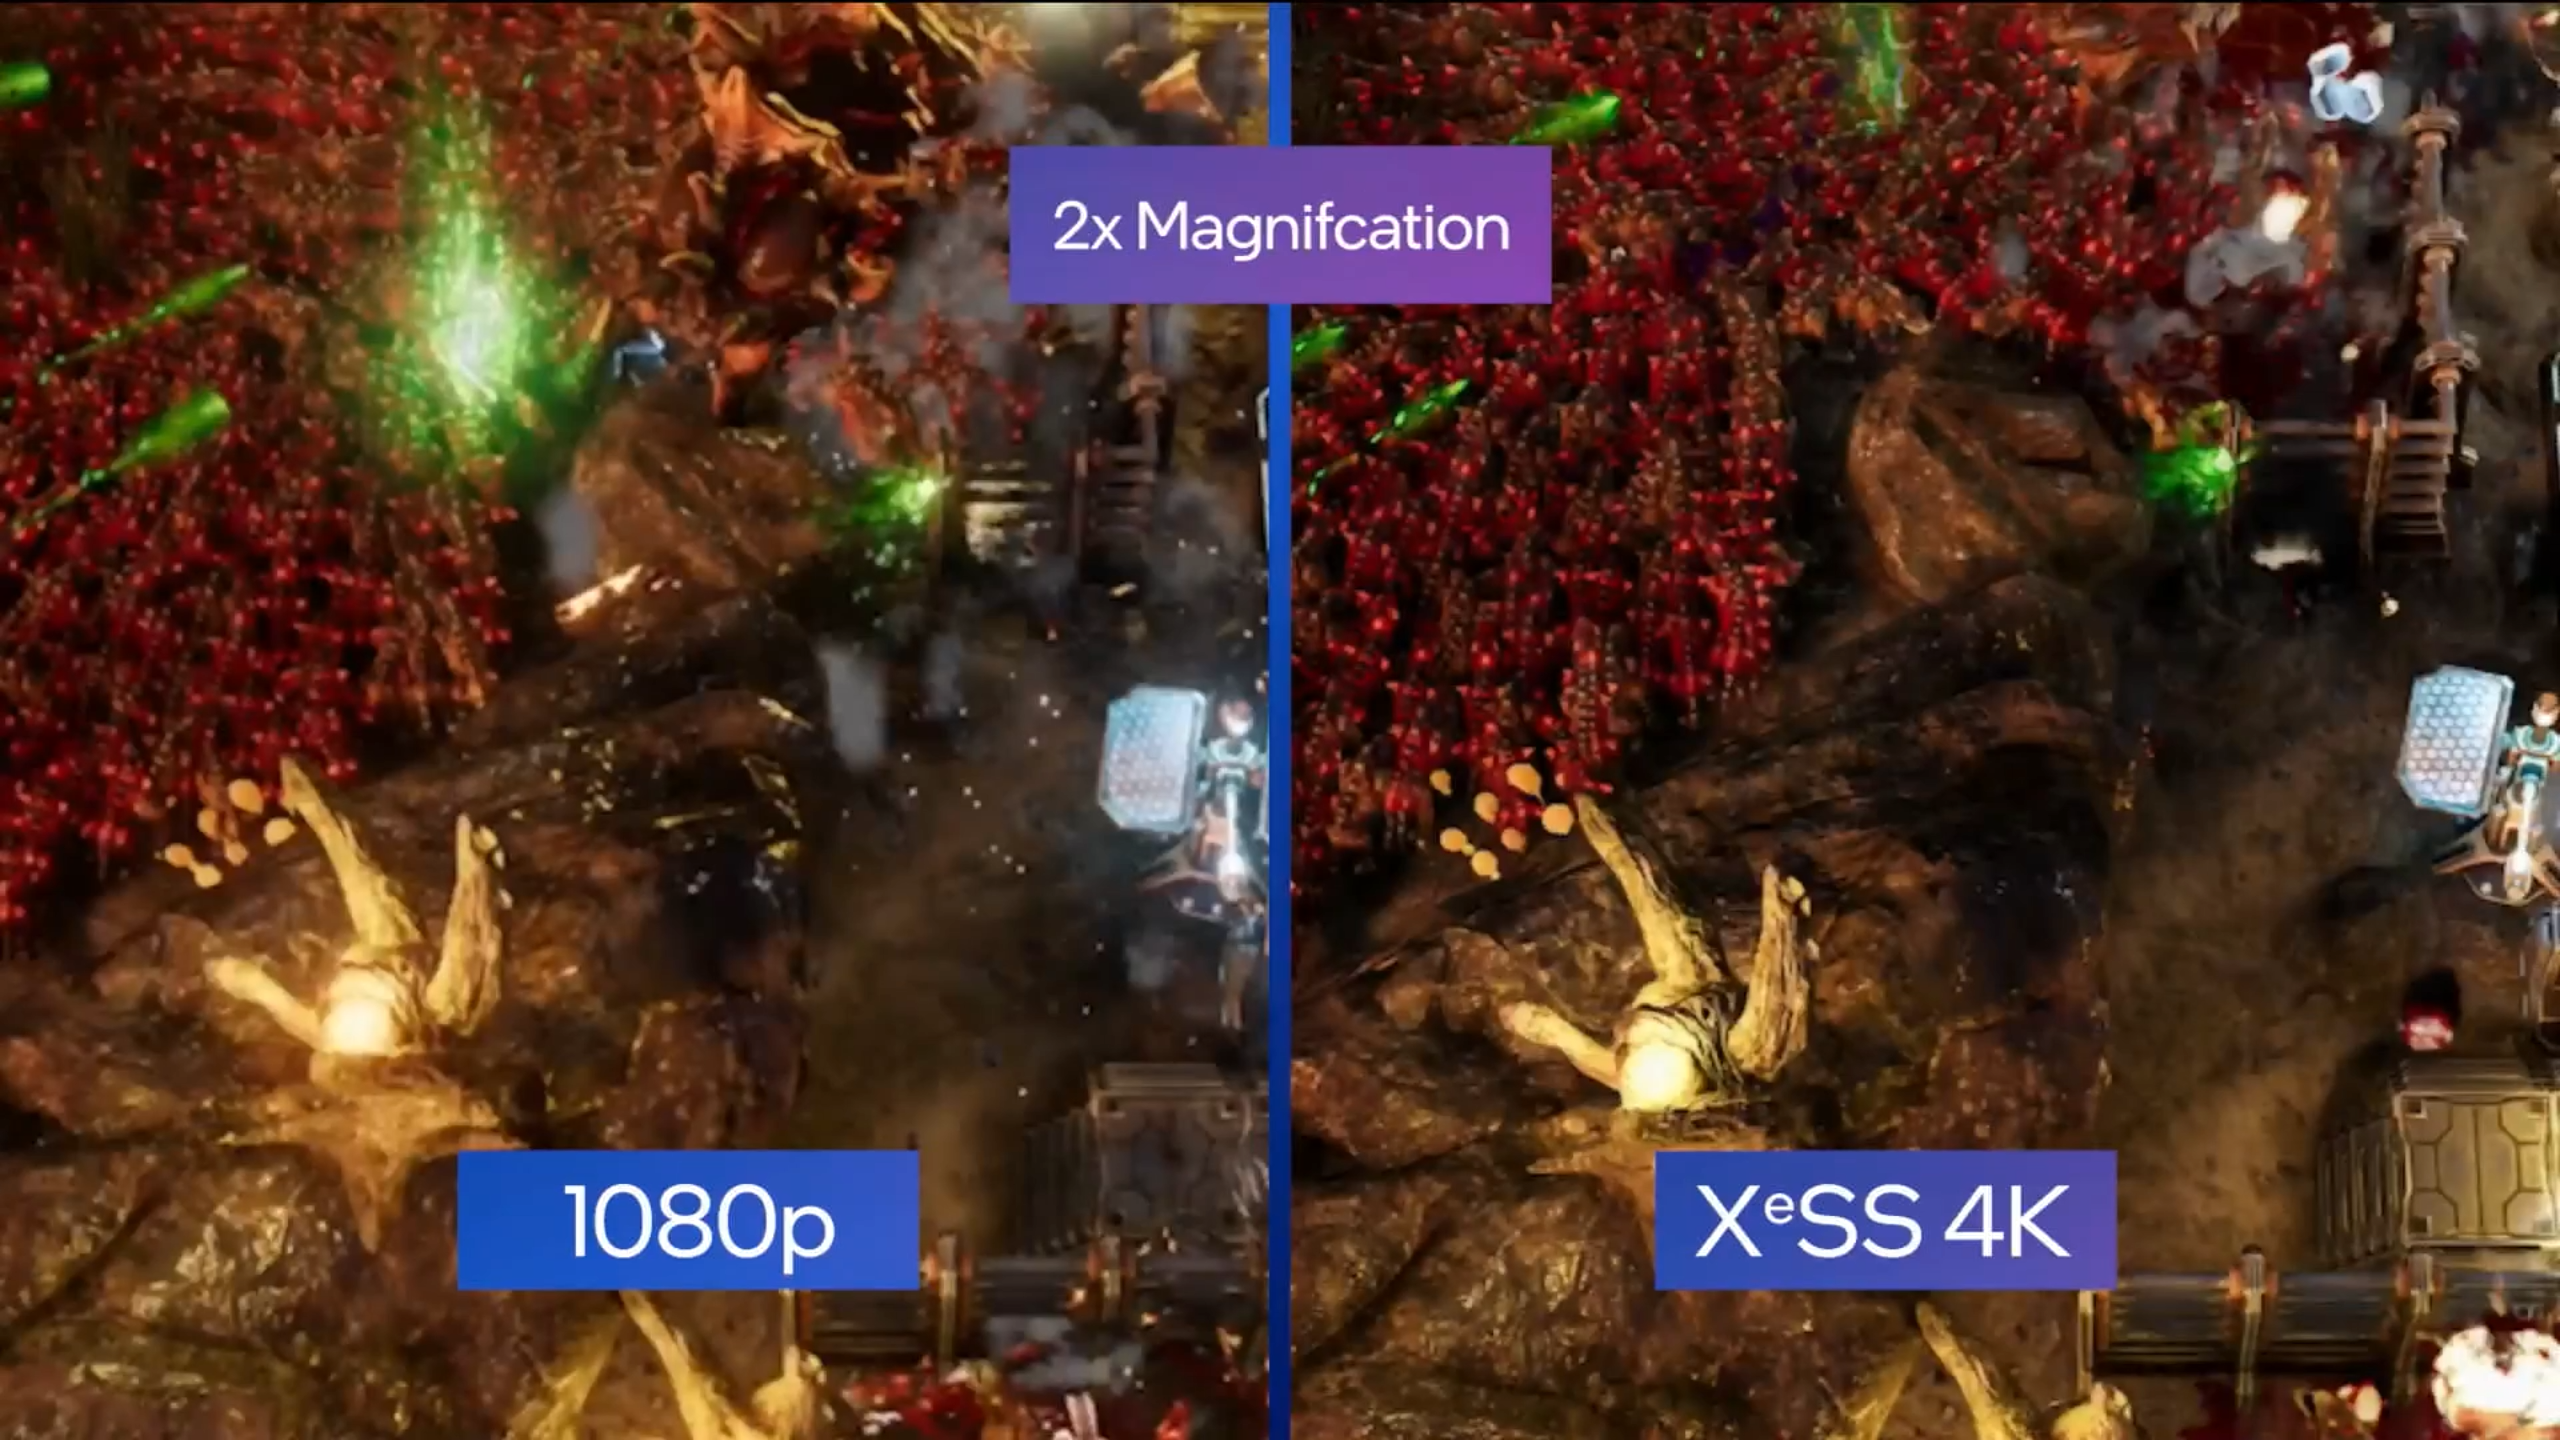 "XeSS" HD technology installed in the Intel GPU "Arc", the first watch game for demo PC